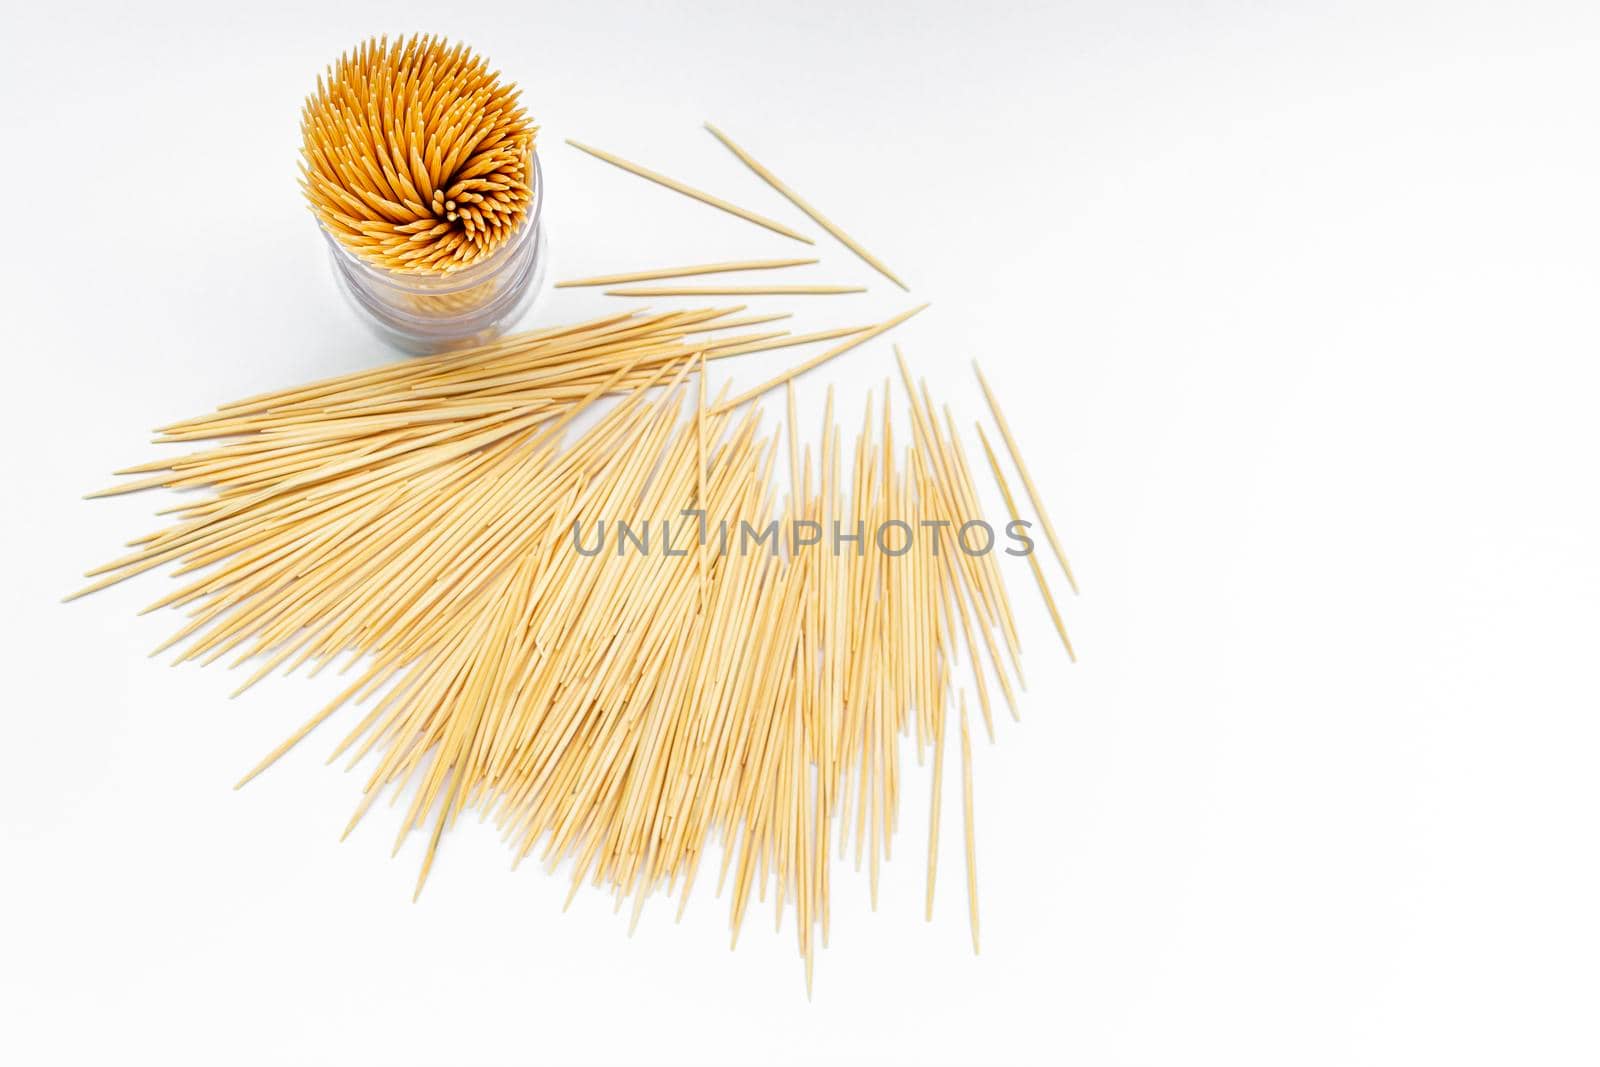 Pile of round wooden toothpicks and toothpick box with a plastic cover on white background. Copy space. Directly above. Flat lay.